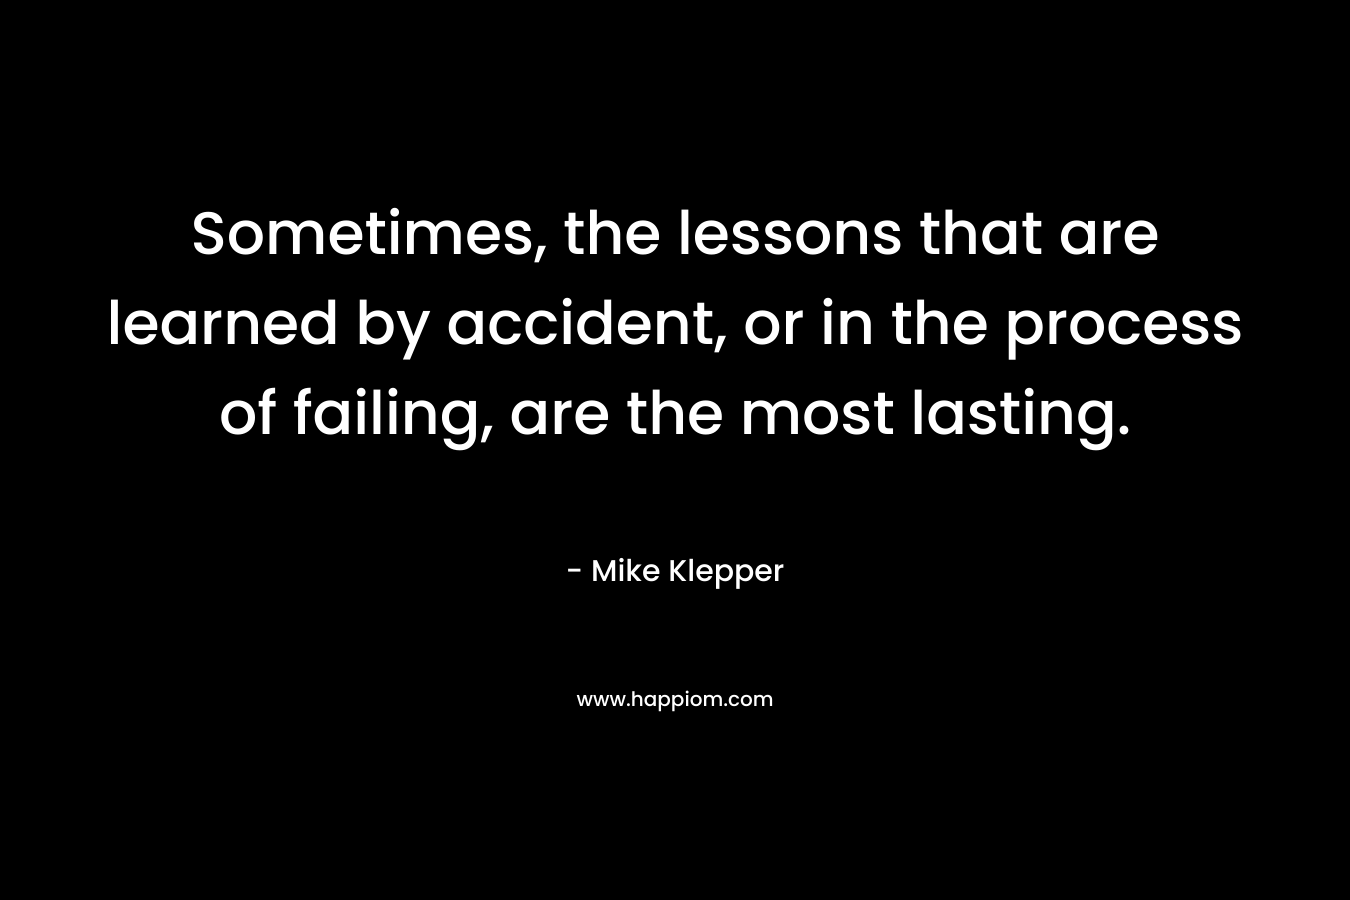 Sometimes, the lessons that are learned by accident, or in the process of failing, are the most lasting.